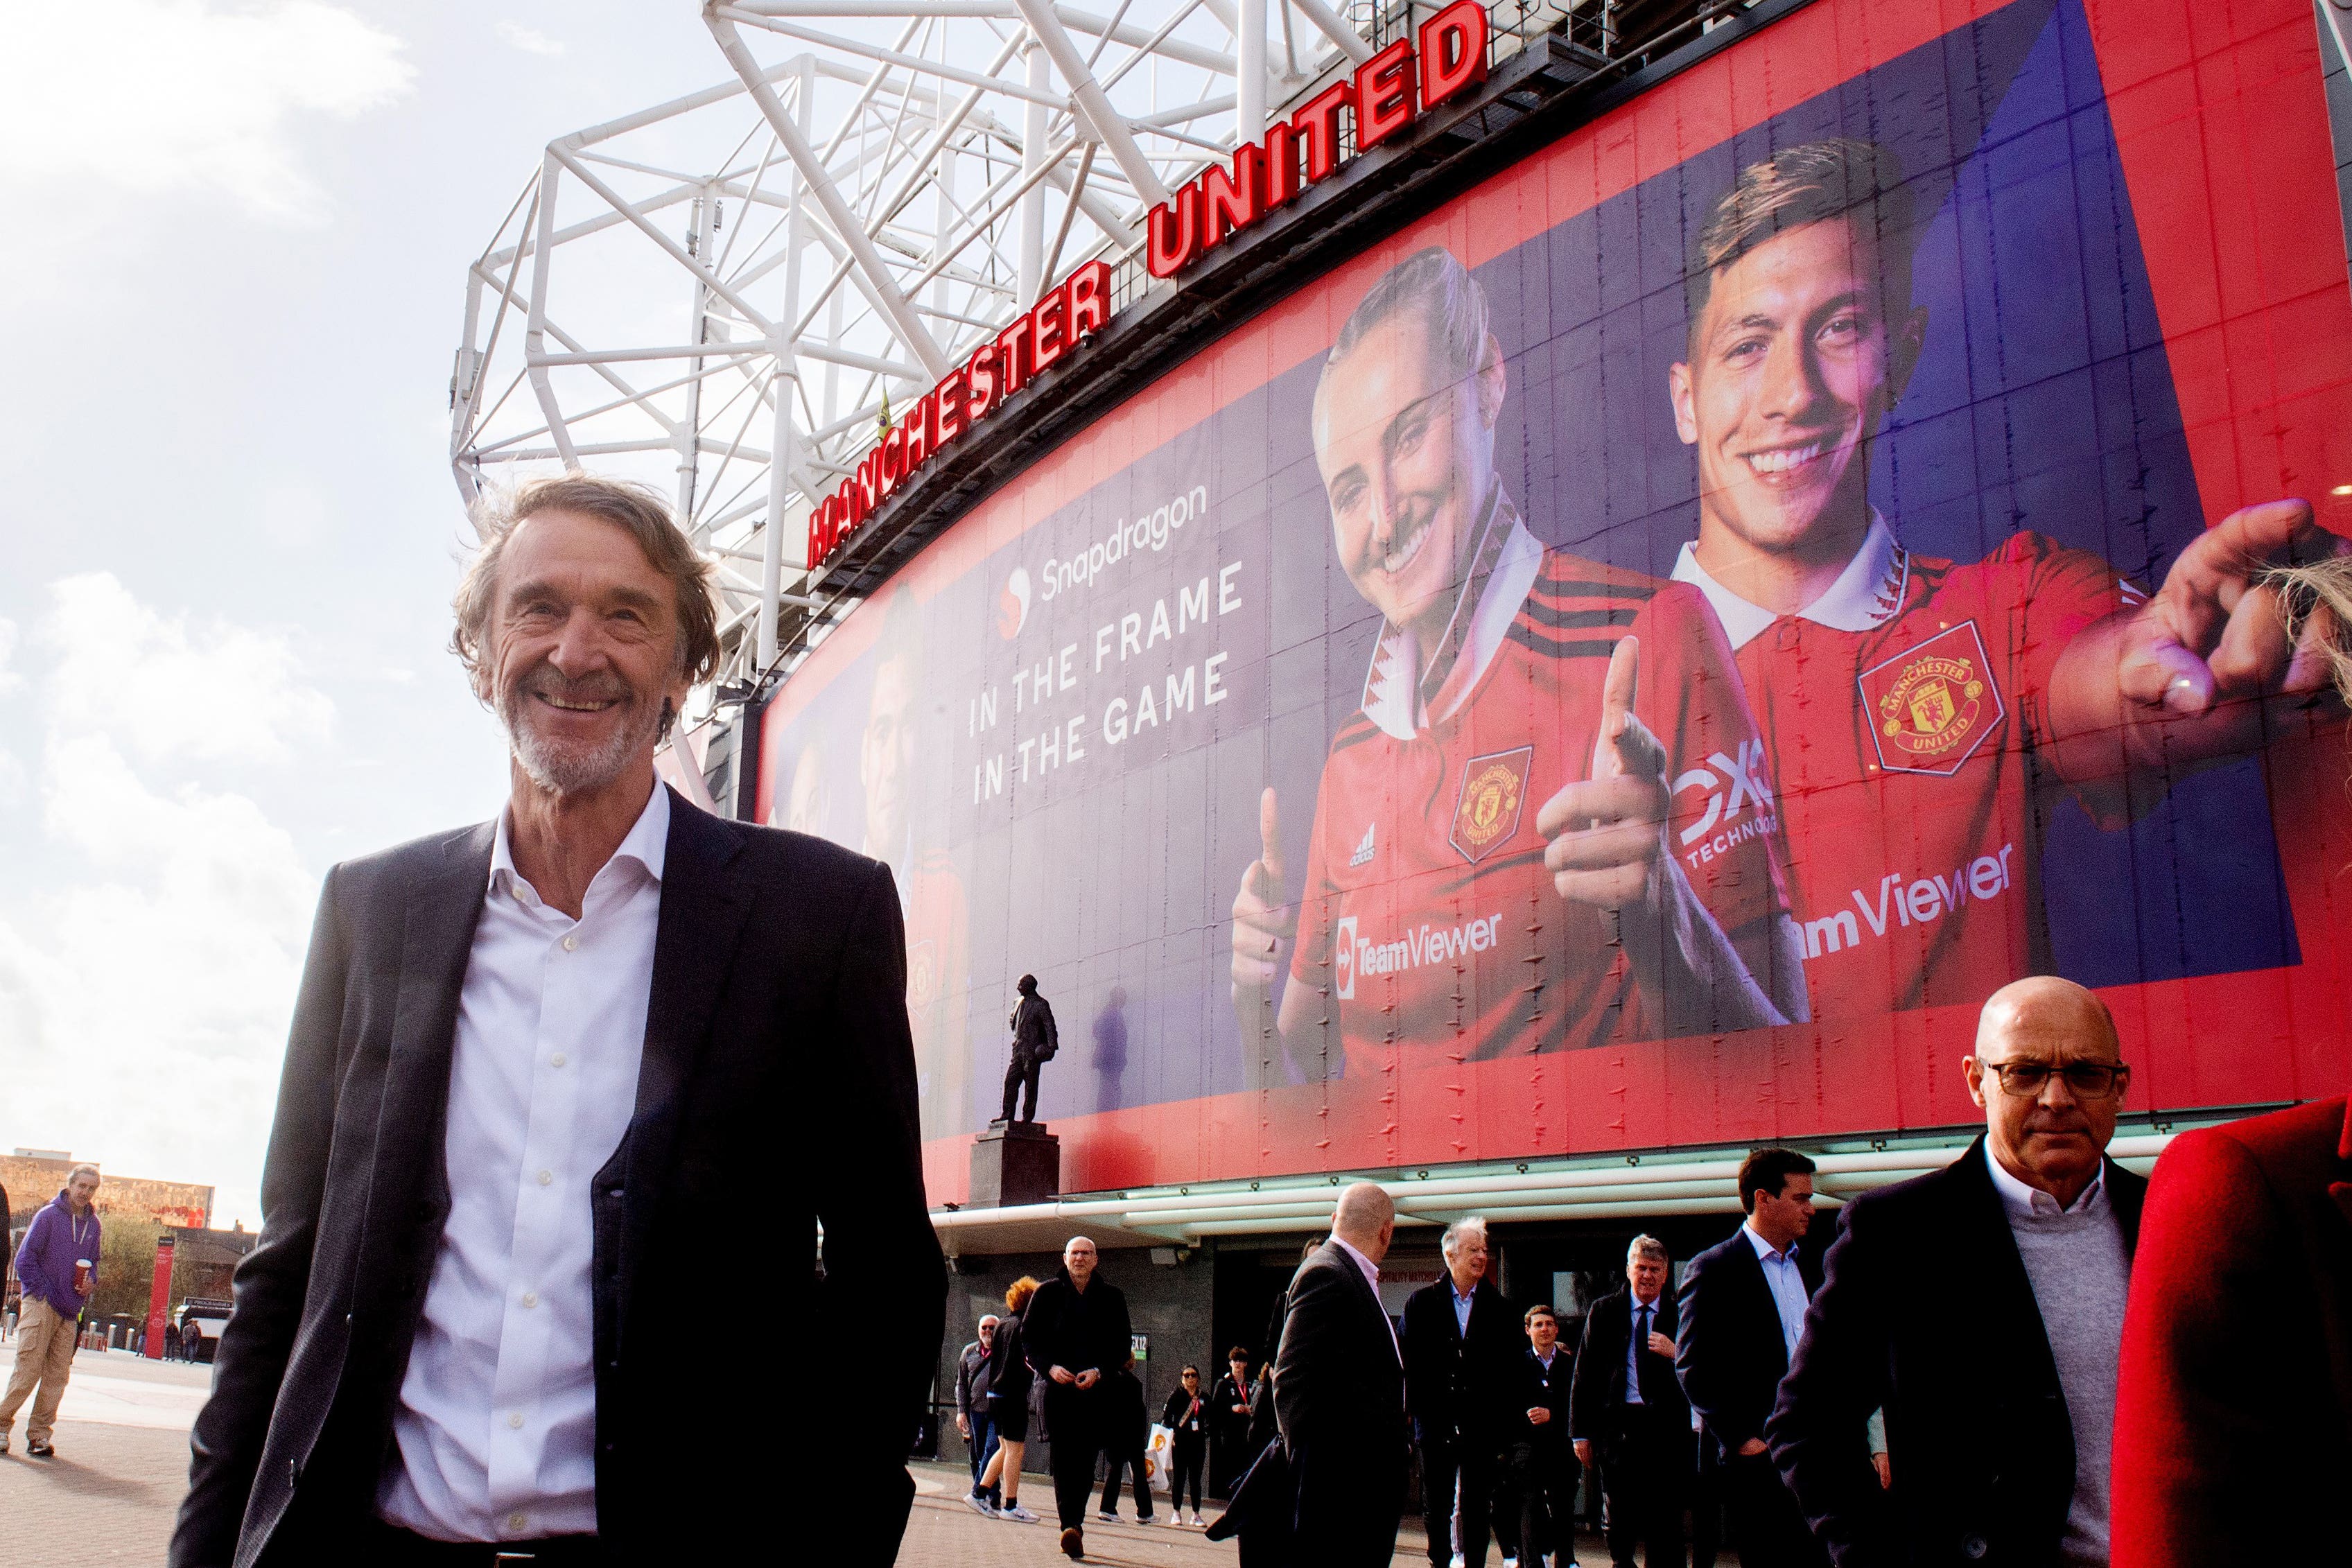 Sir Jim Ratcliffe has agreed a deal to purchase a 25 per cent minority stake in Man Utd